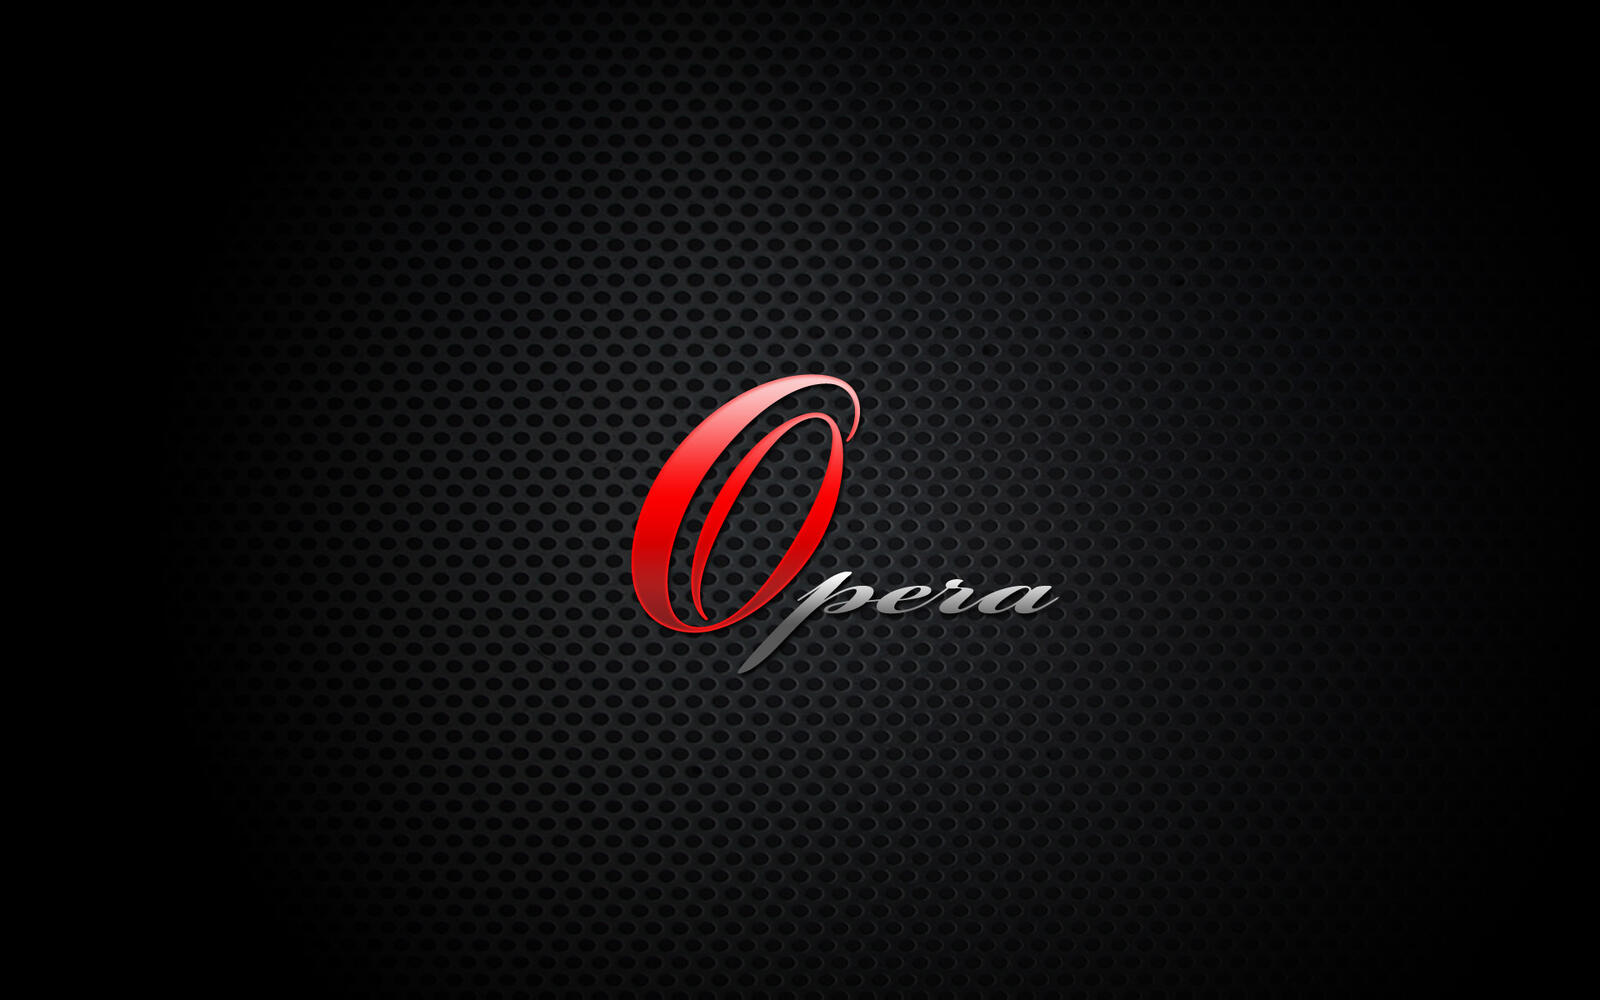 Wallpapers opera browser other on the desktop